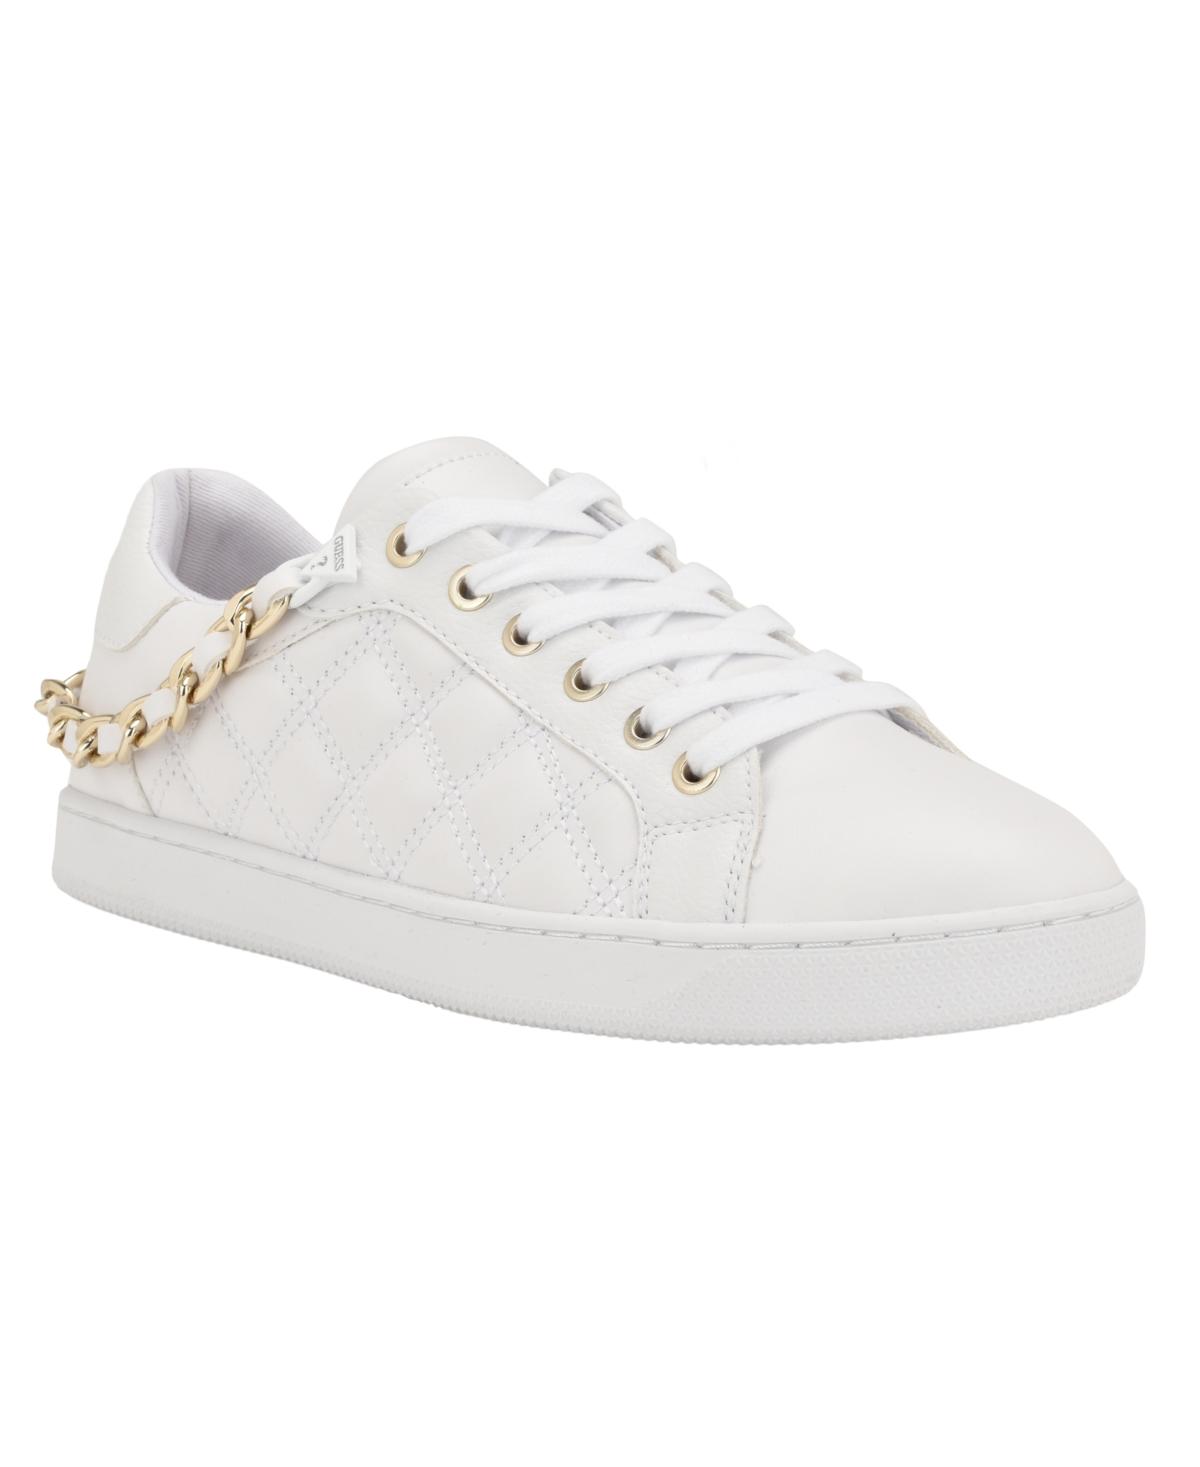 Guess Reney Stylish Quilted Sneakers in White | Lyst